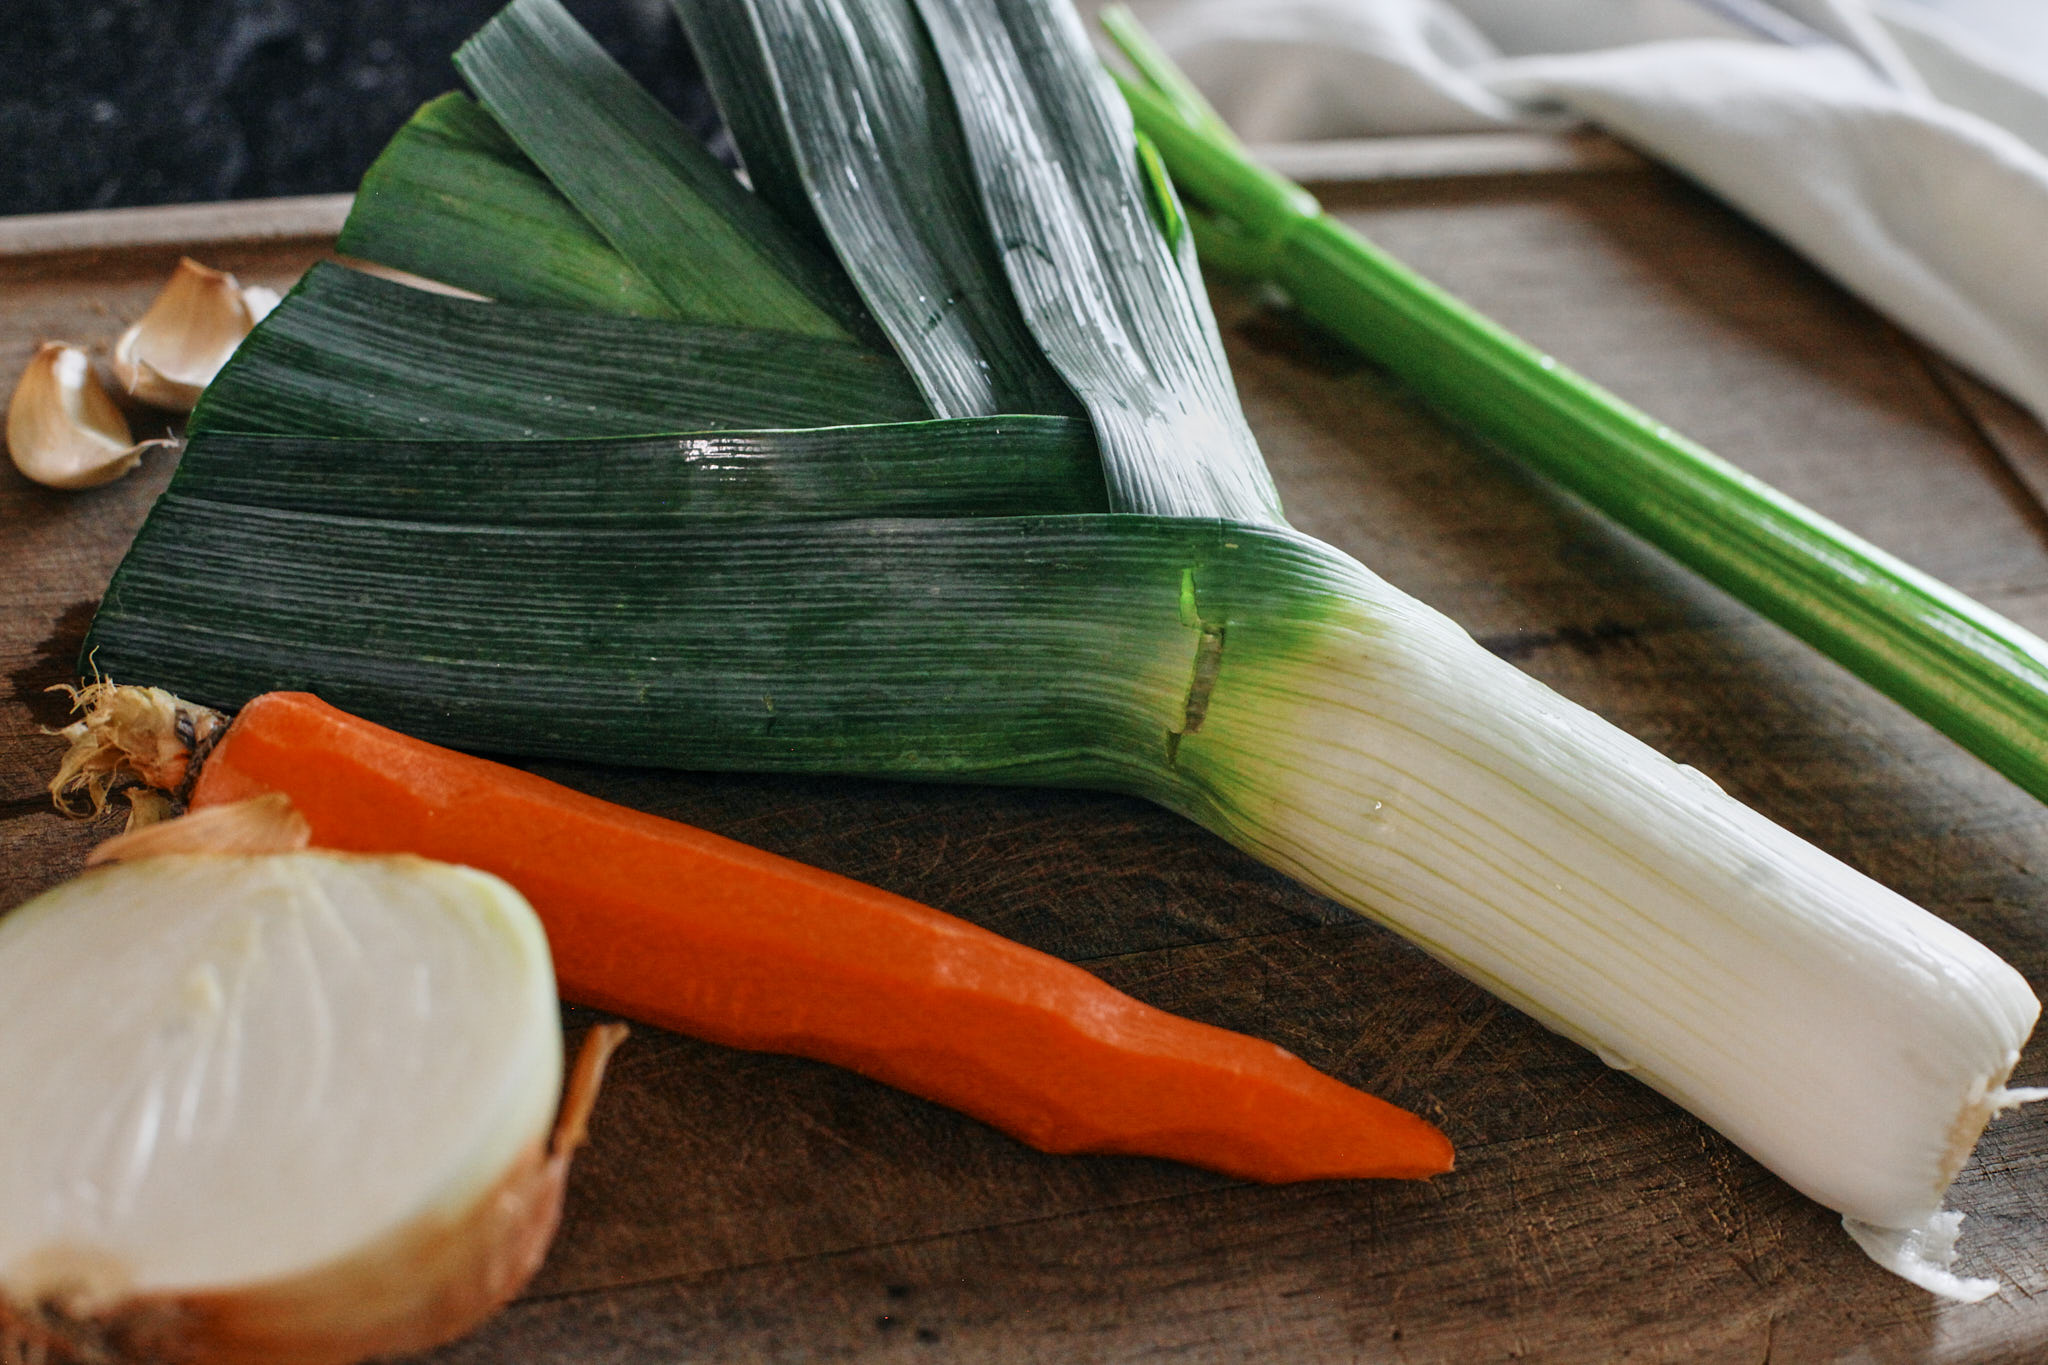 prep for the soup - leek, celery, garlic, carrot and onion